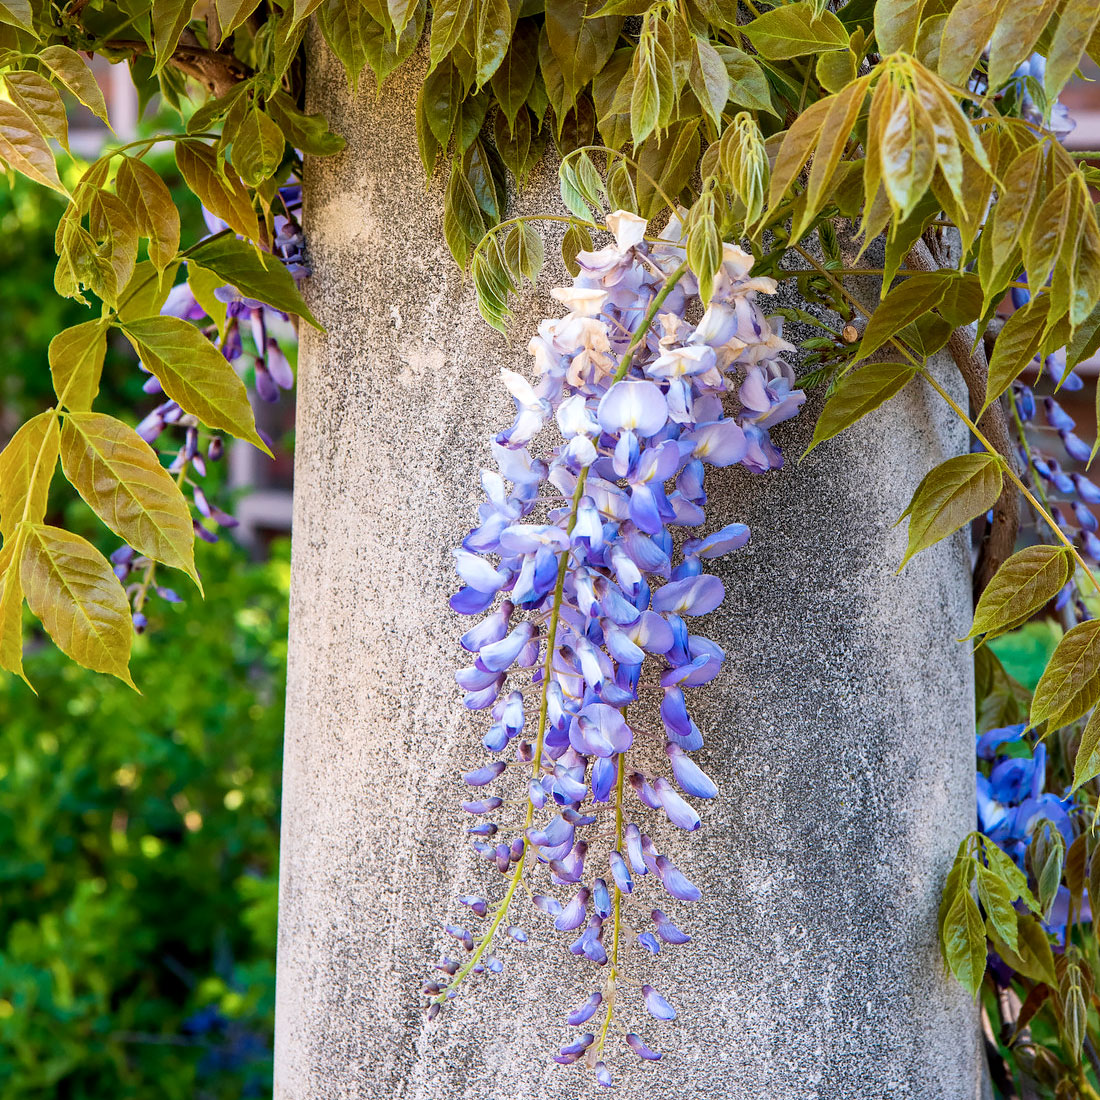 Wisteria in the English Walled Garden